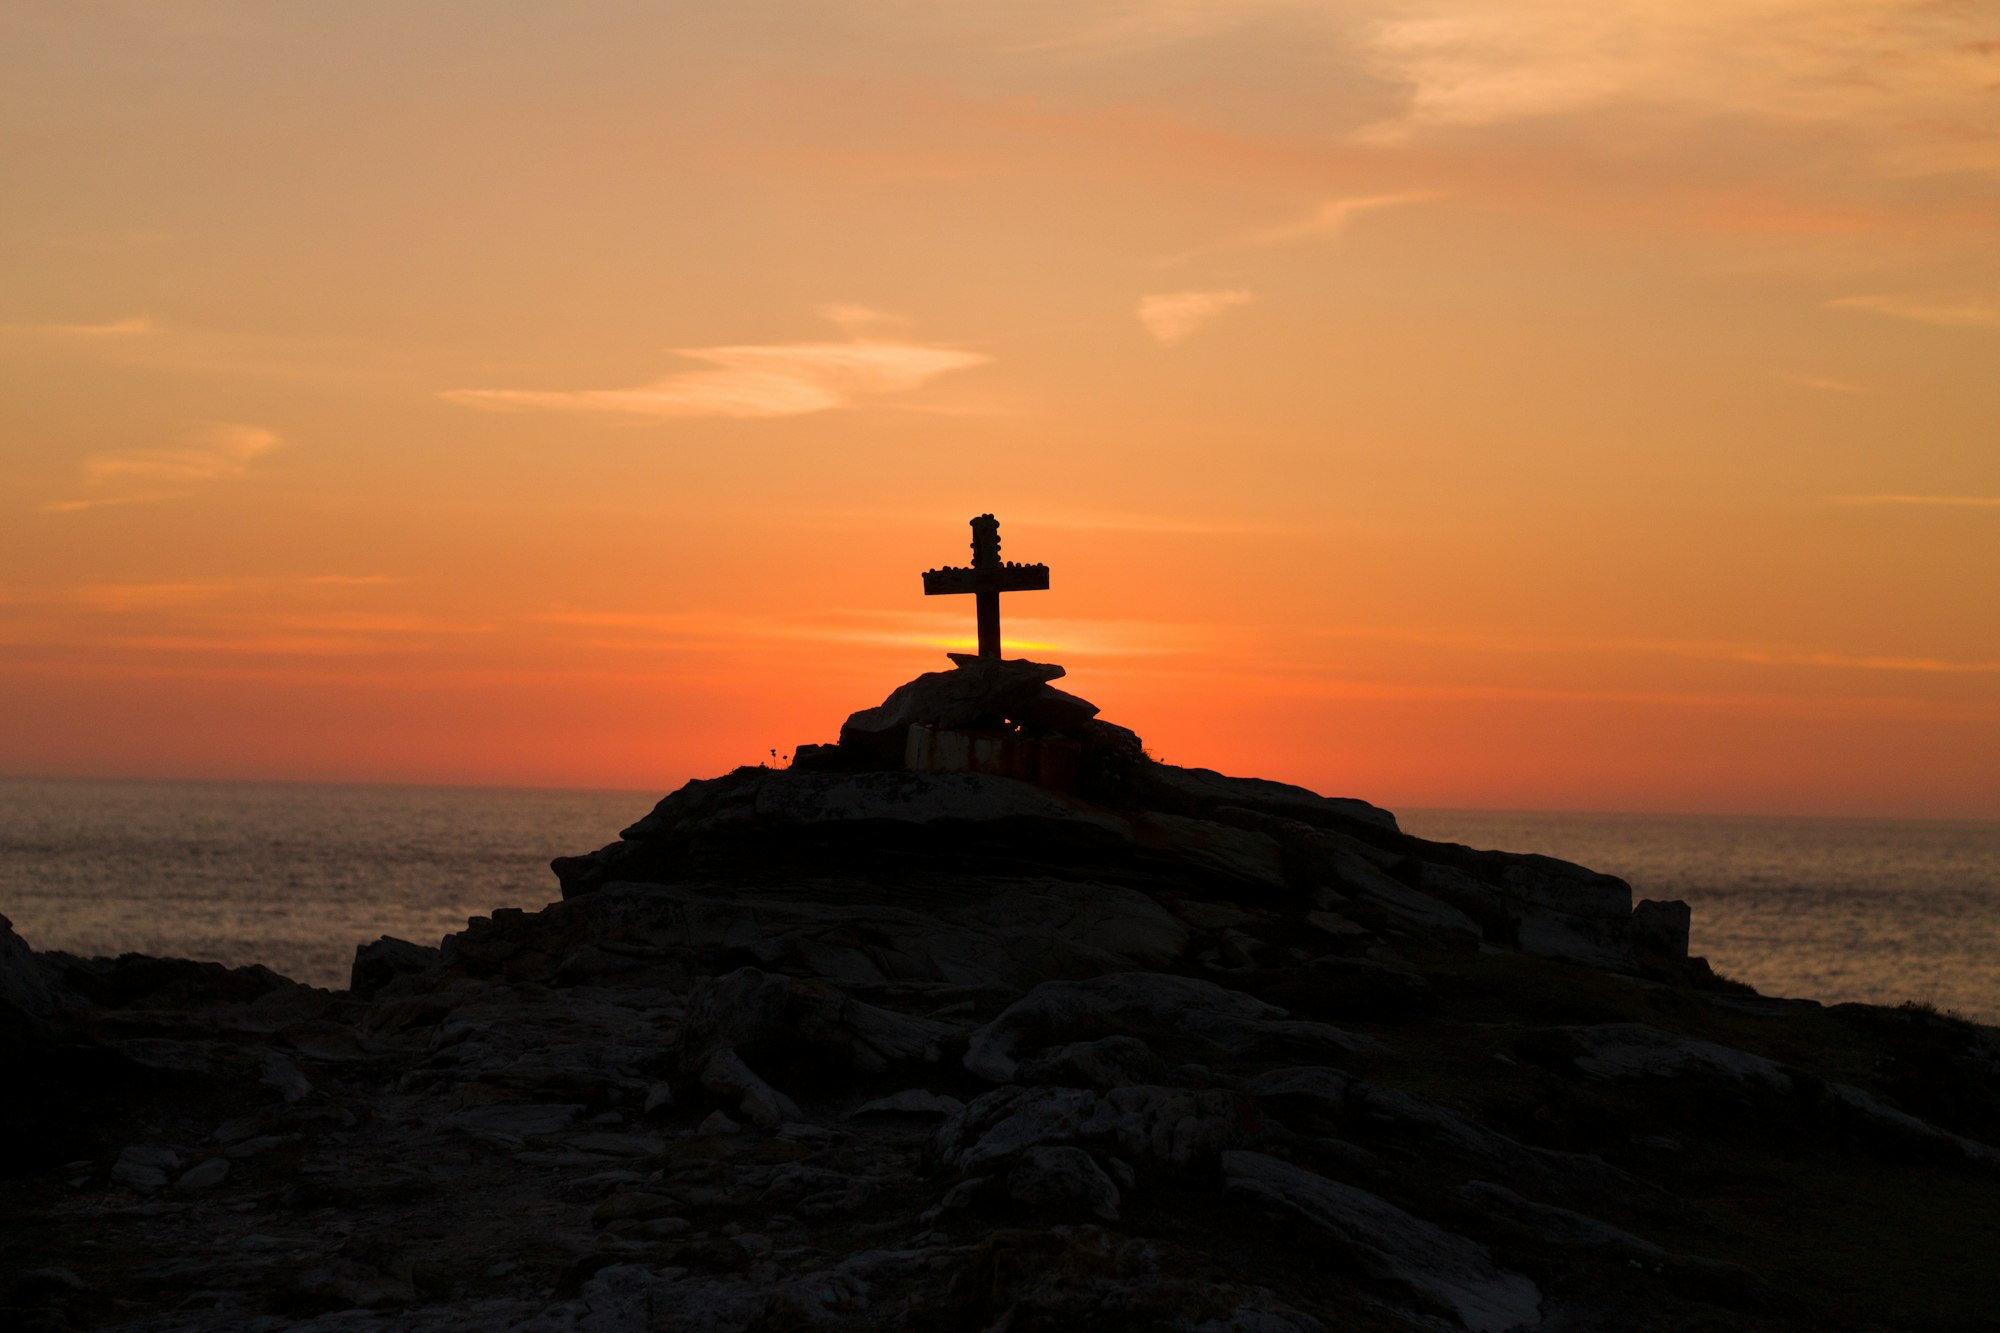 A Cross perched on the Cliffs of Malin Head, Co. Donegal, Ireland. A Memorial to a young french man who drowned off the coast. Nowadays visitors leave coins and other religious items on the monument.